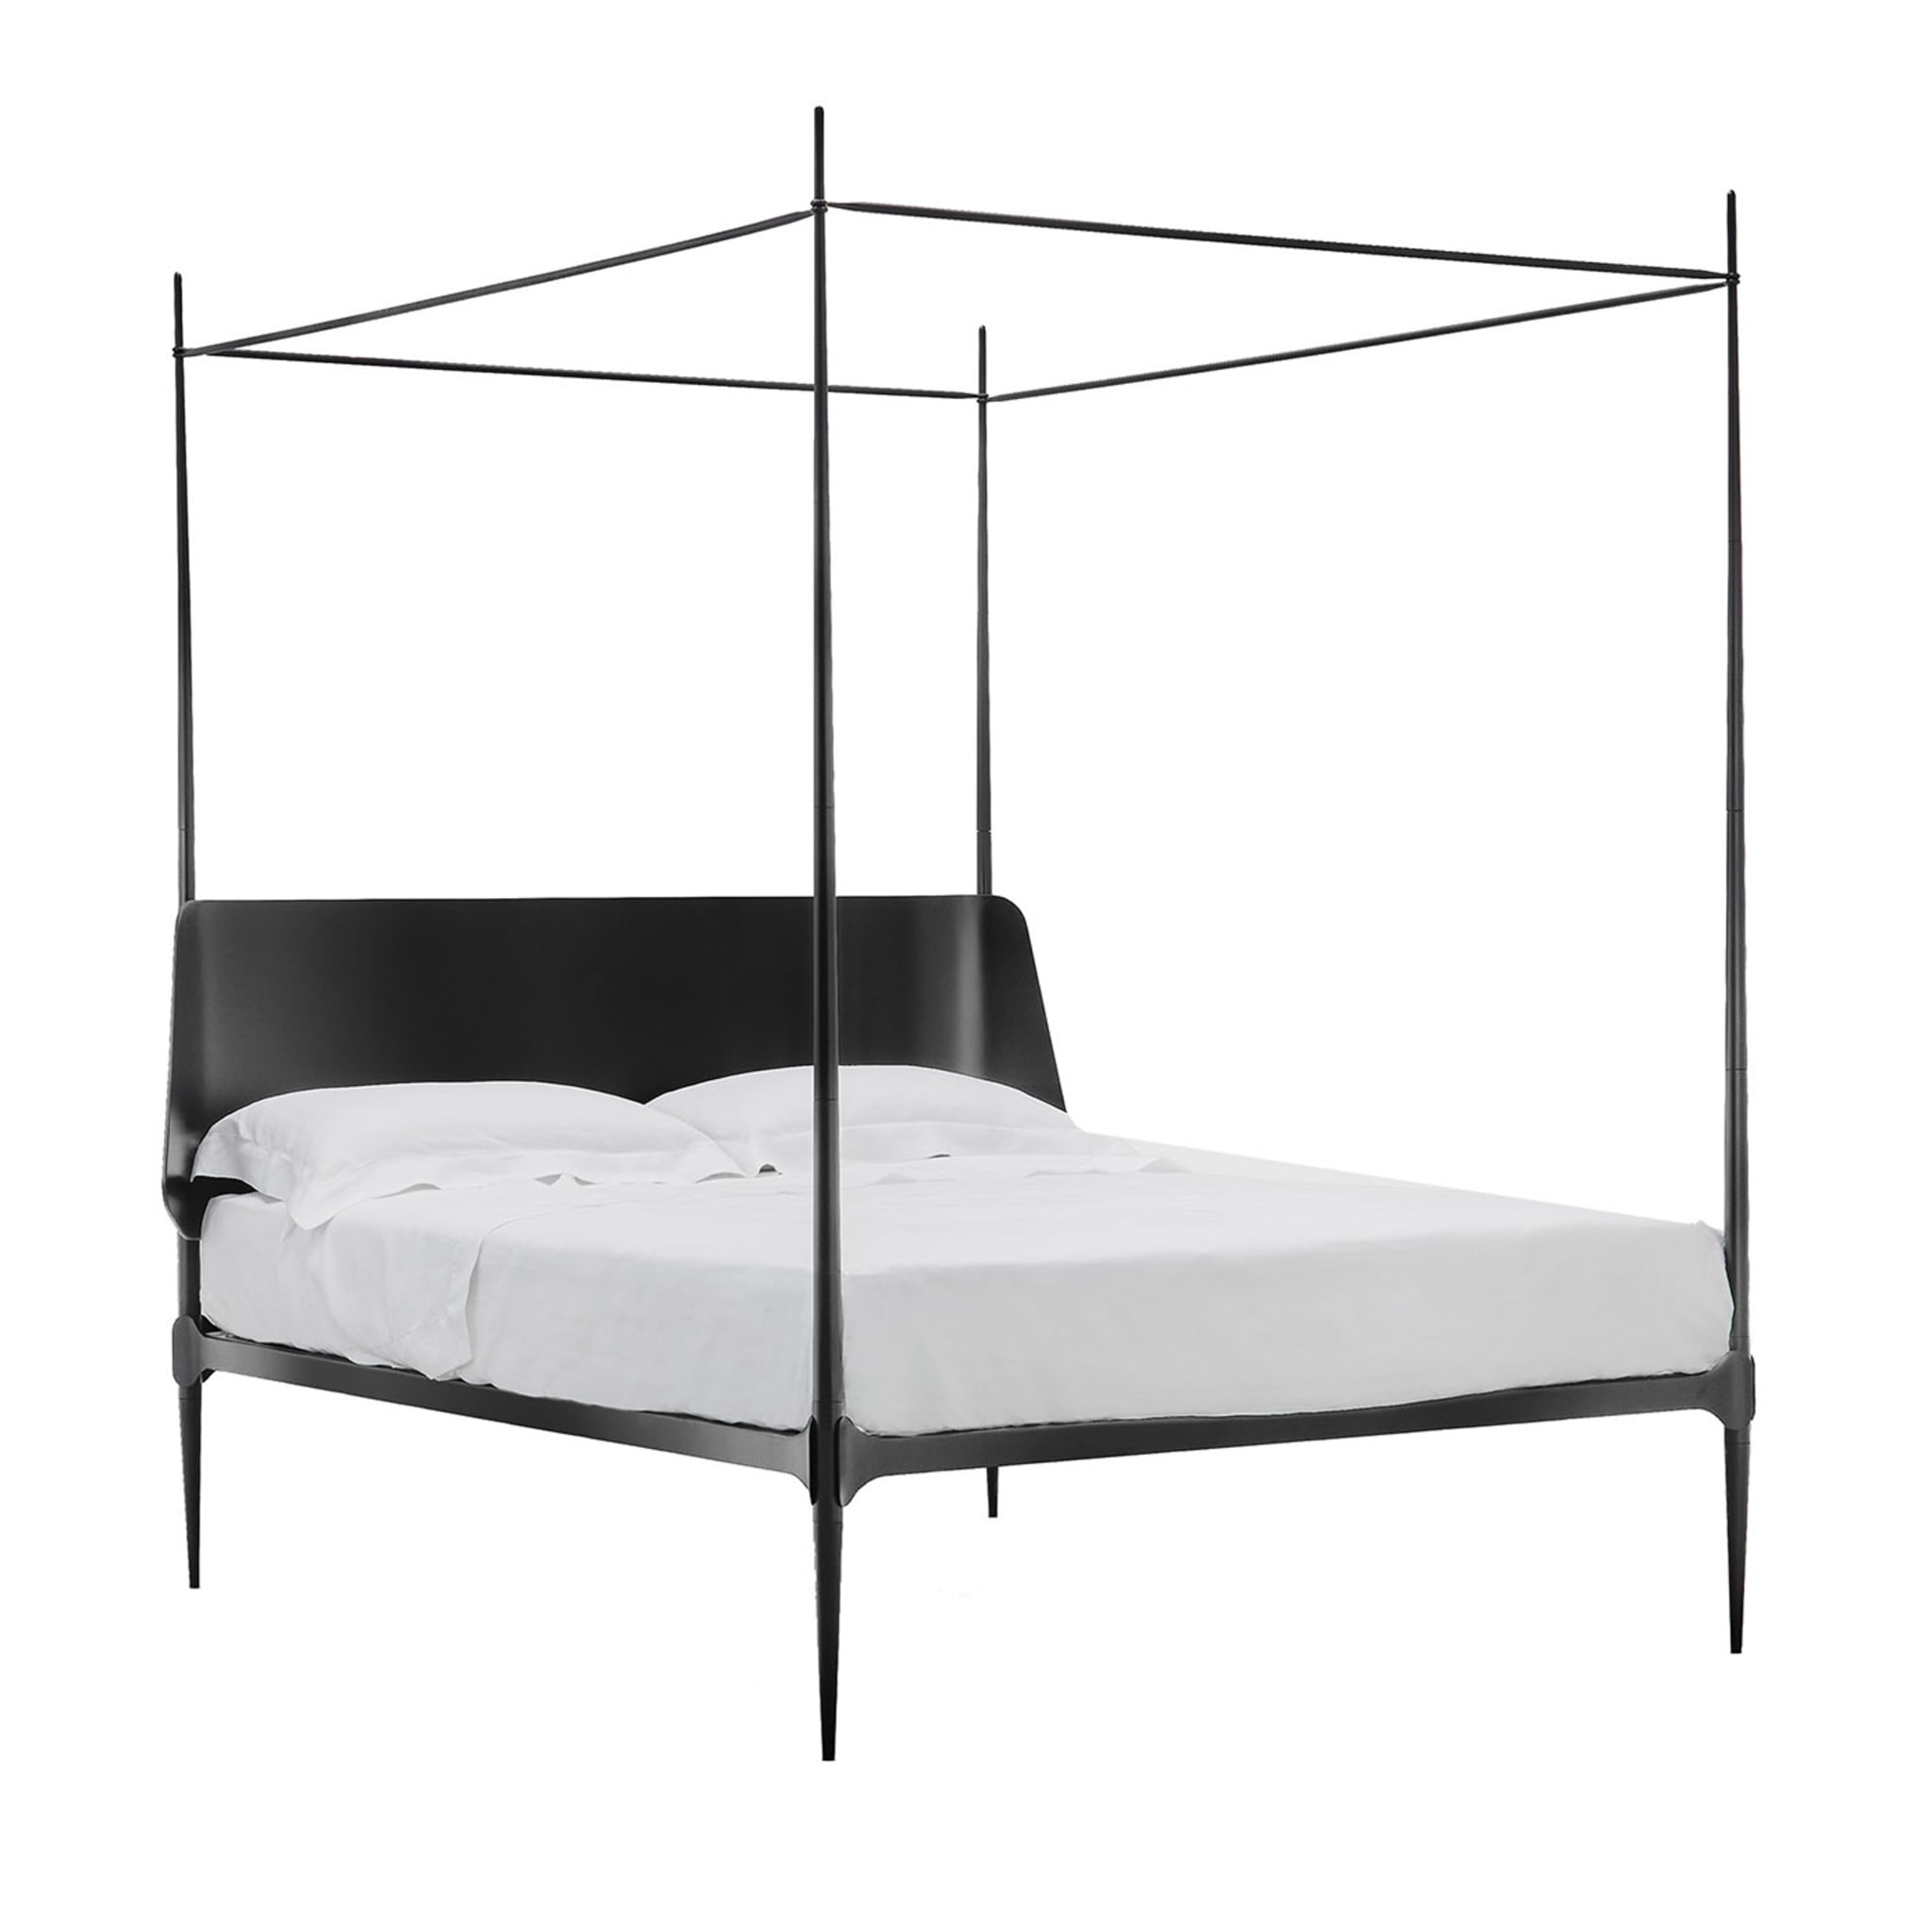 Clamp Bed By Francesco Forcellini - Main view